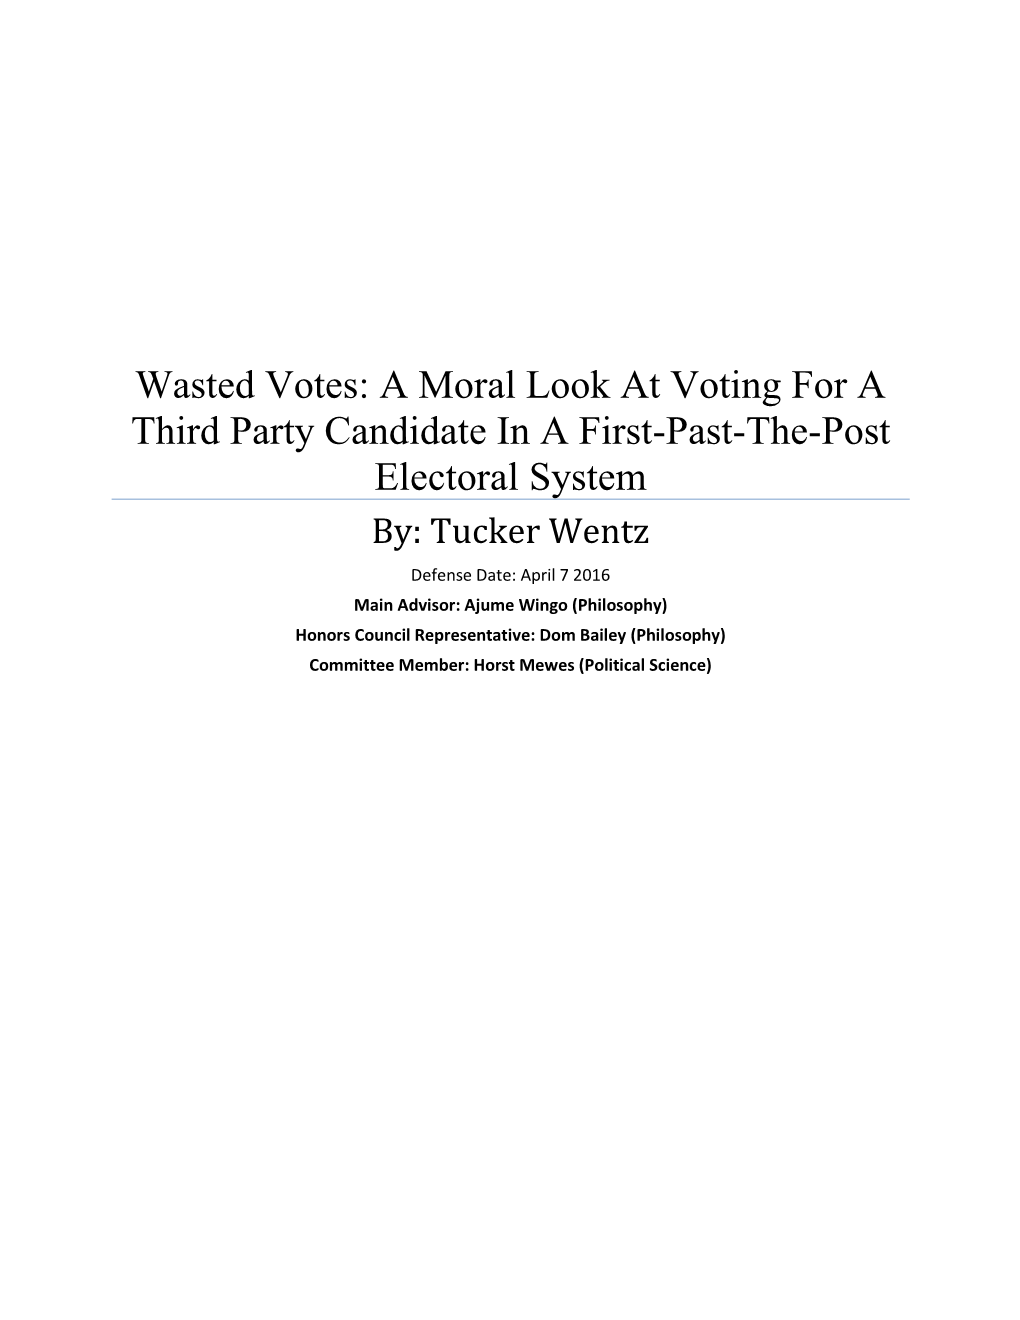 Wasted Votes: a Moral Look at Voting for a Third Party Candidate in A